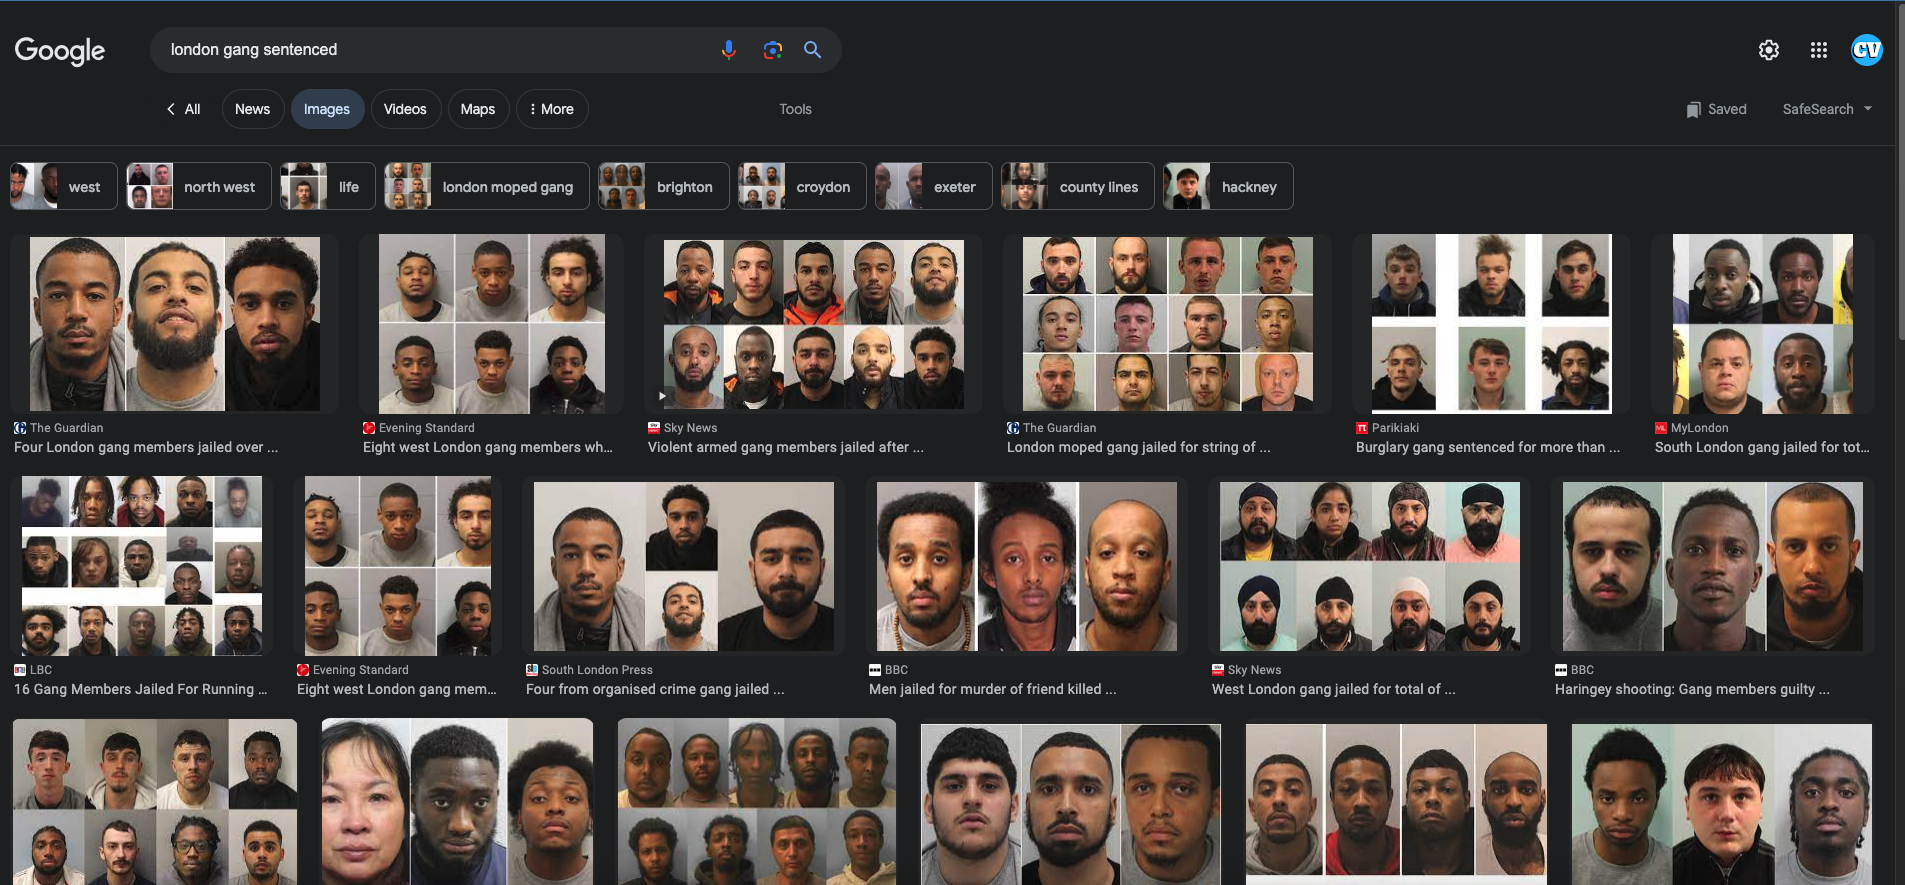 Screen shot of Google search results for gang members sentenced in London